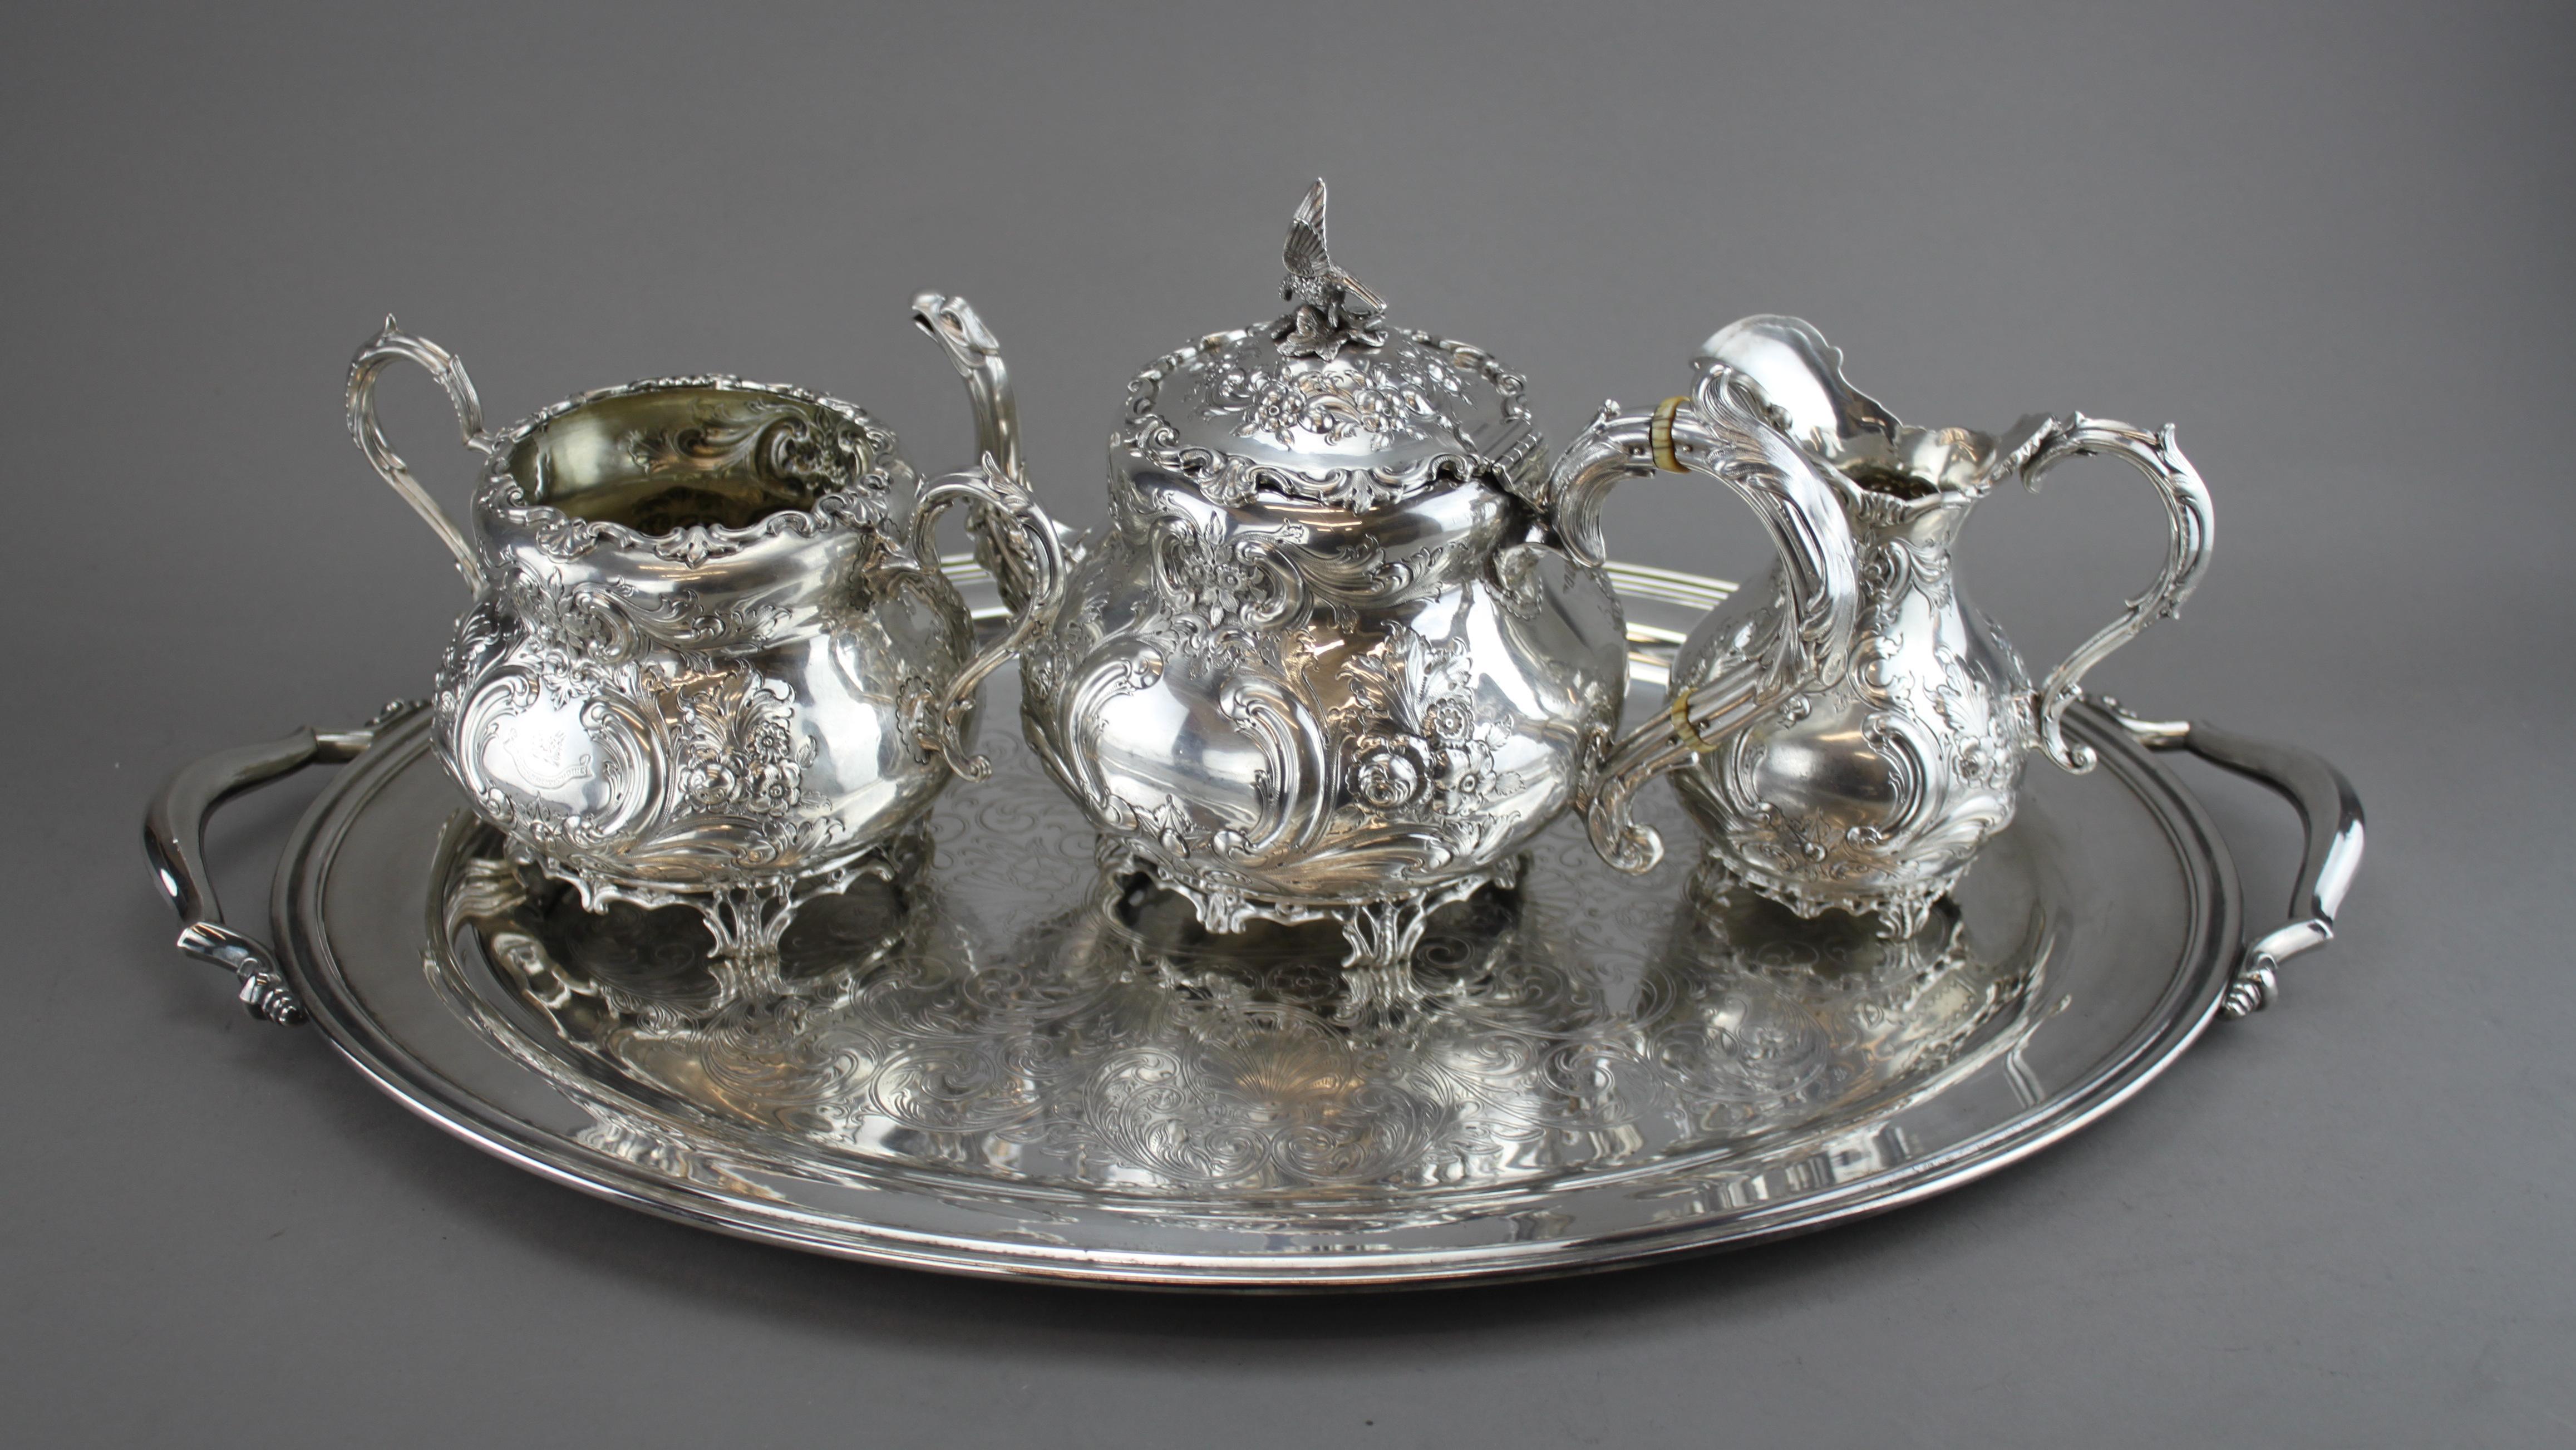 Antique sterling silver elaborately engraved tea service set.
Maker: Charles Lambe
Made in Dublin 1900
Fully hallmarked.

Dimensions - 
Teapot Size : 27 x 16.7 x 19.5 cm
Weight : 768 grams

Sugar Bowl Size: 23 x 14.5 x 14 cm
Weight: 462 grams

Cream